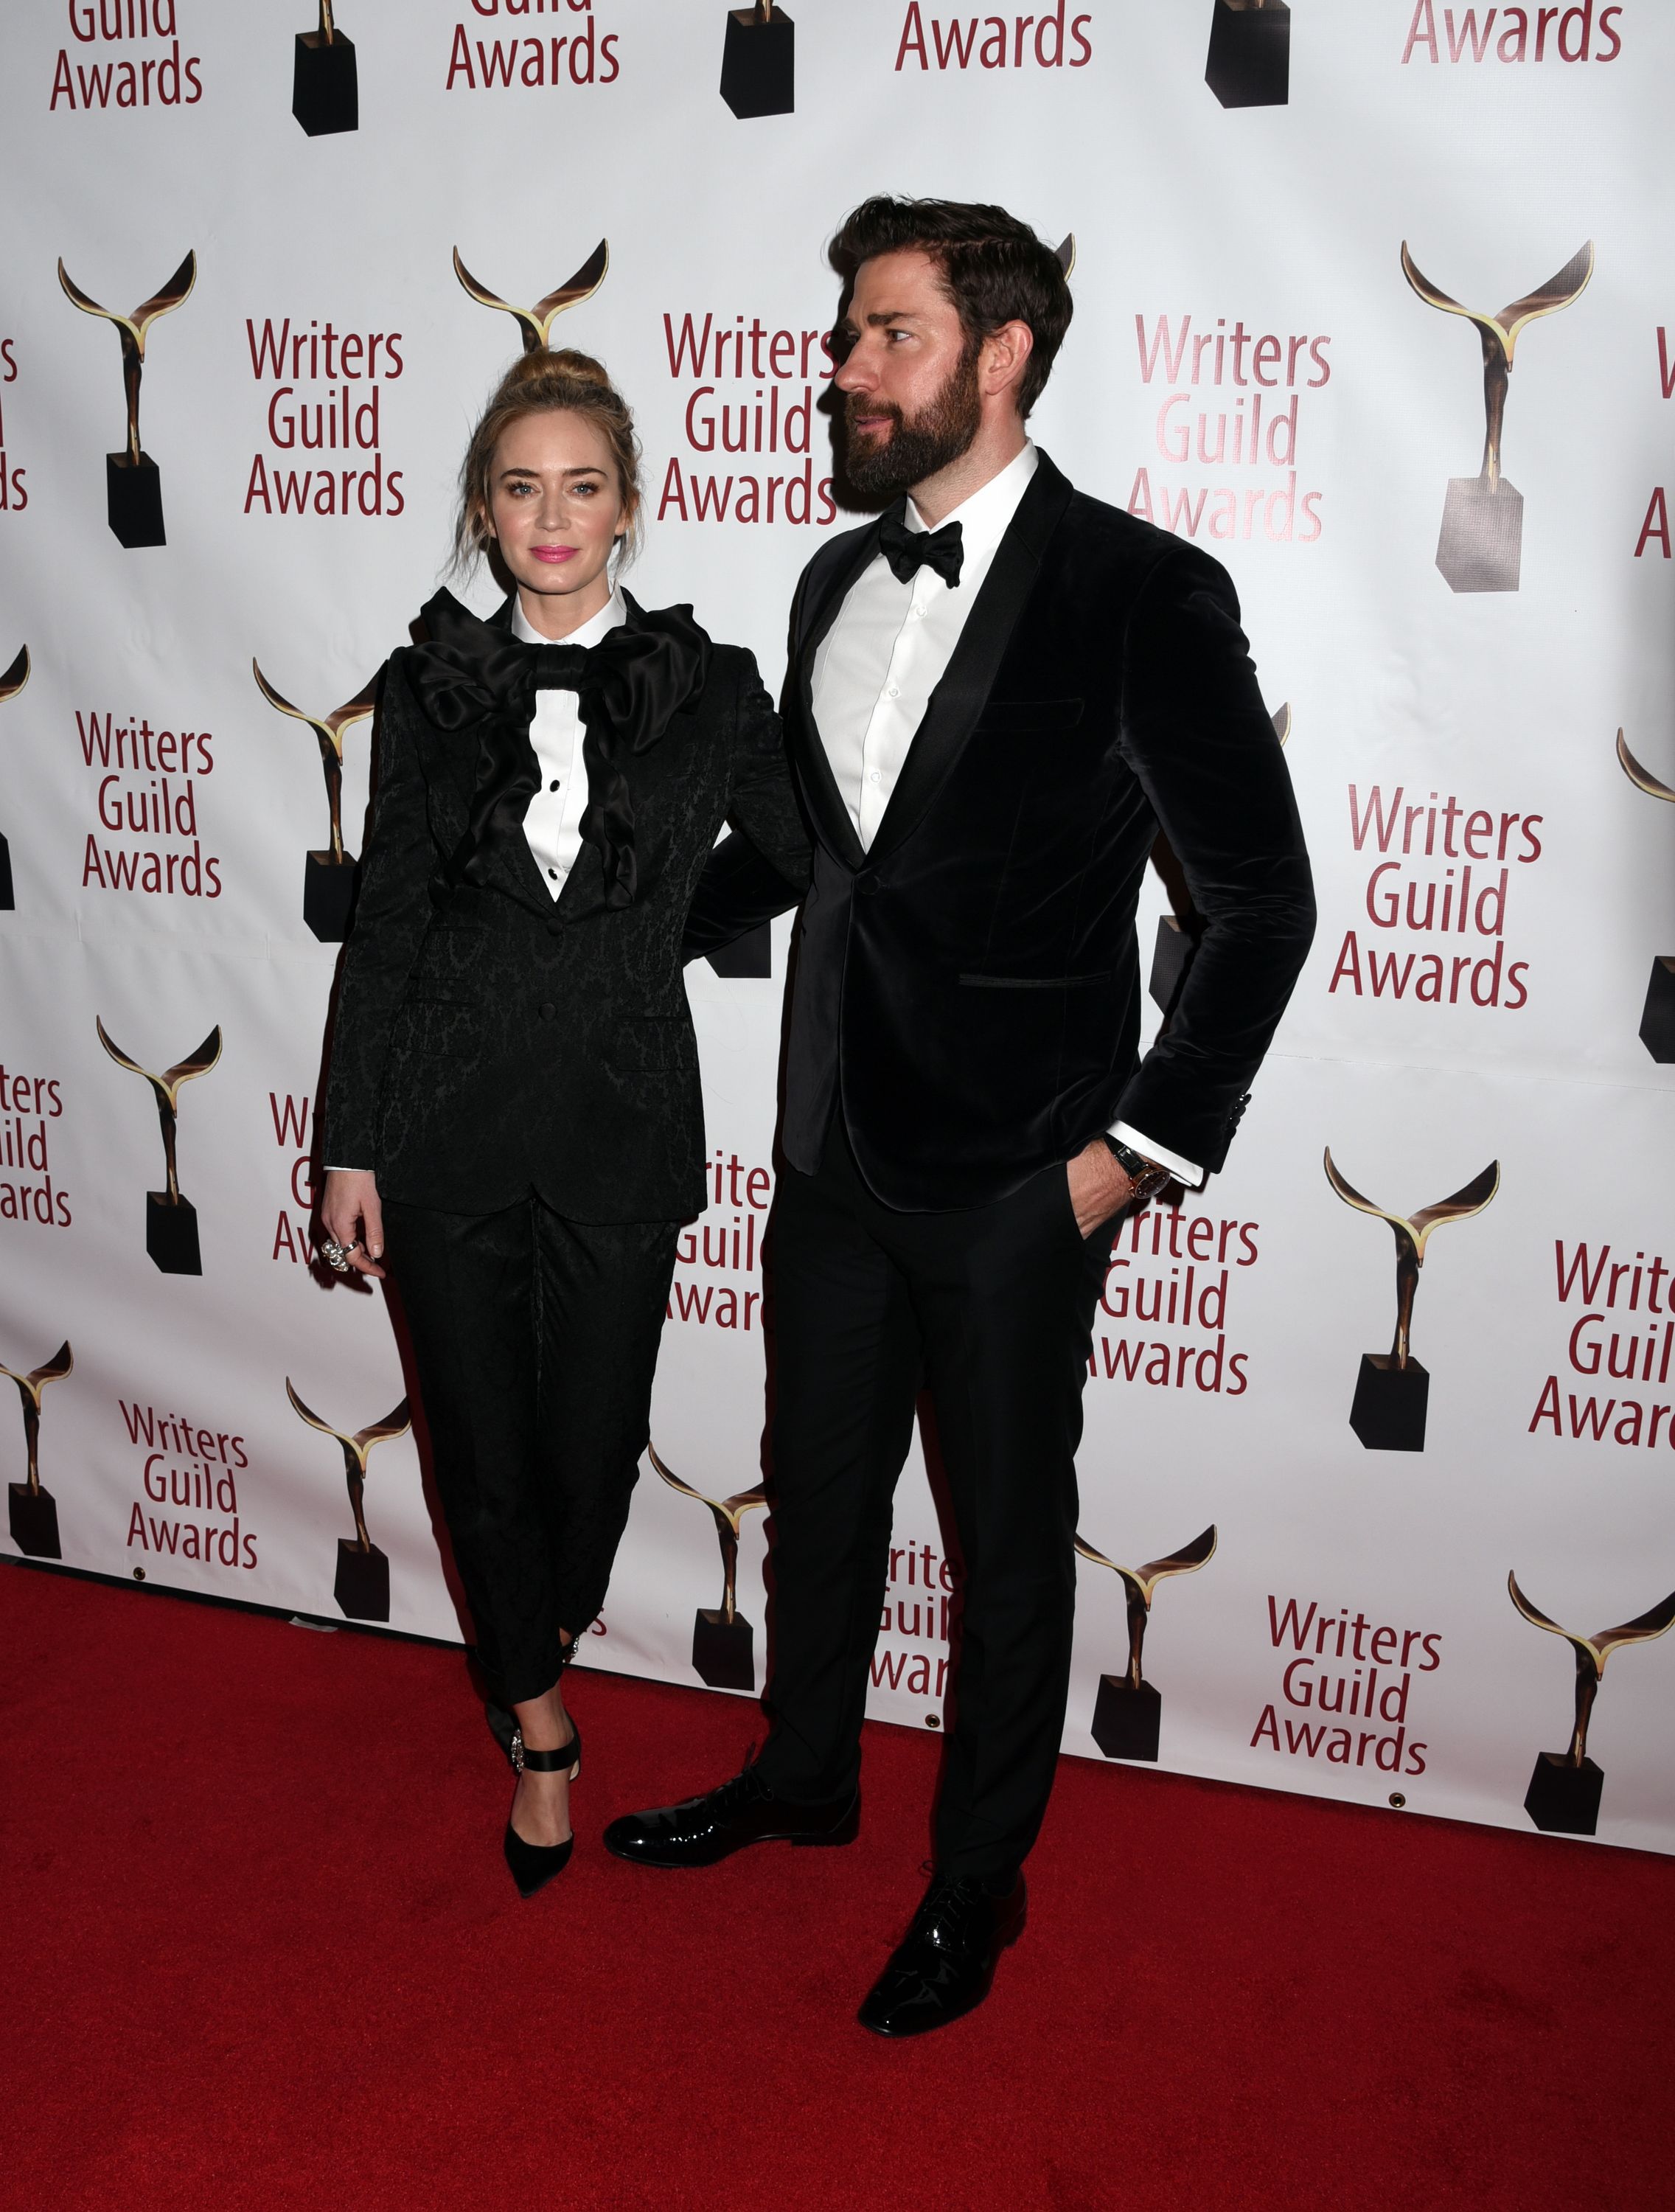 2019-02-17-71st-Annual-Writers-Guild-Awards-145.jpg